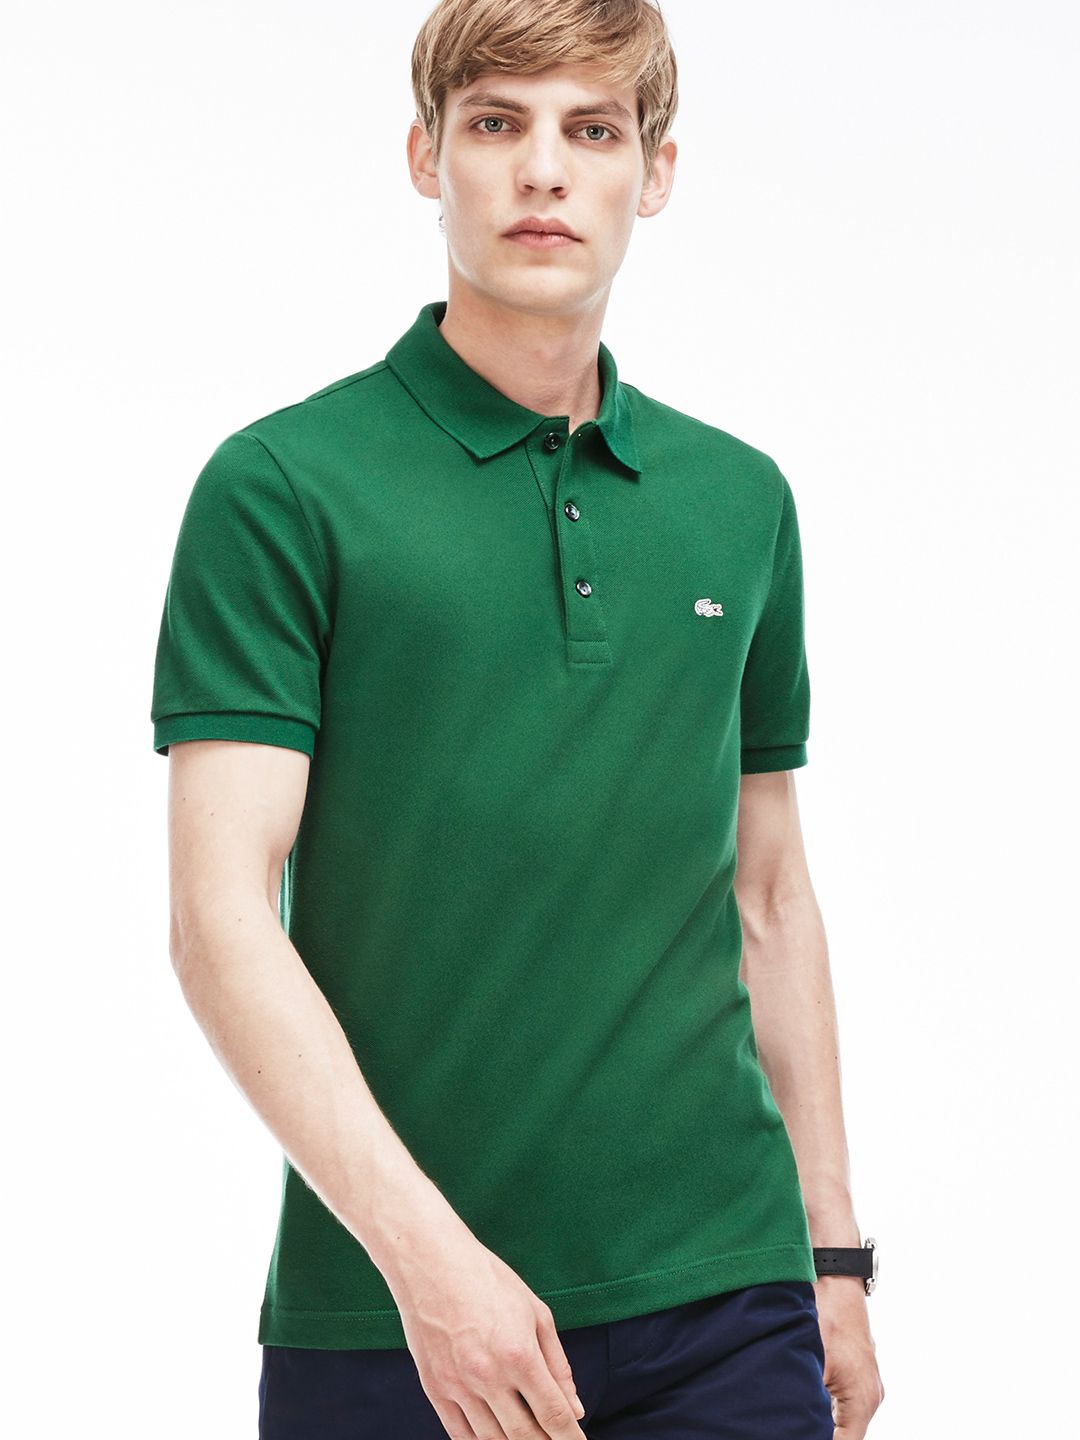 lacoste t shirts india